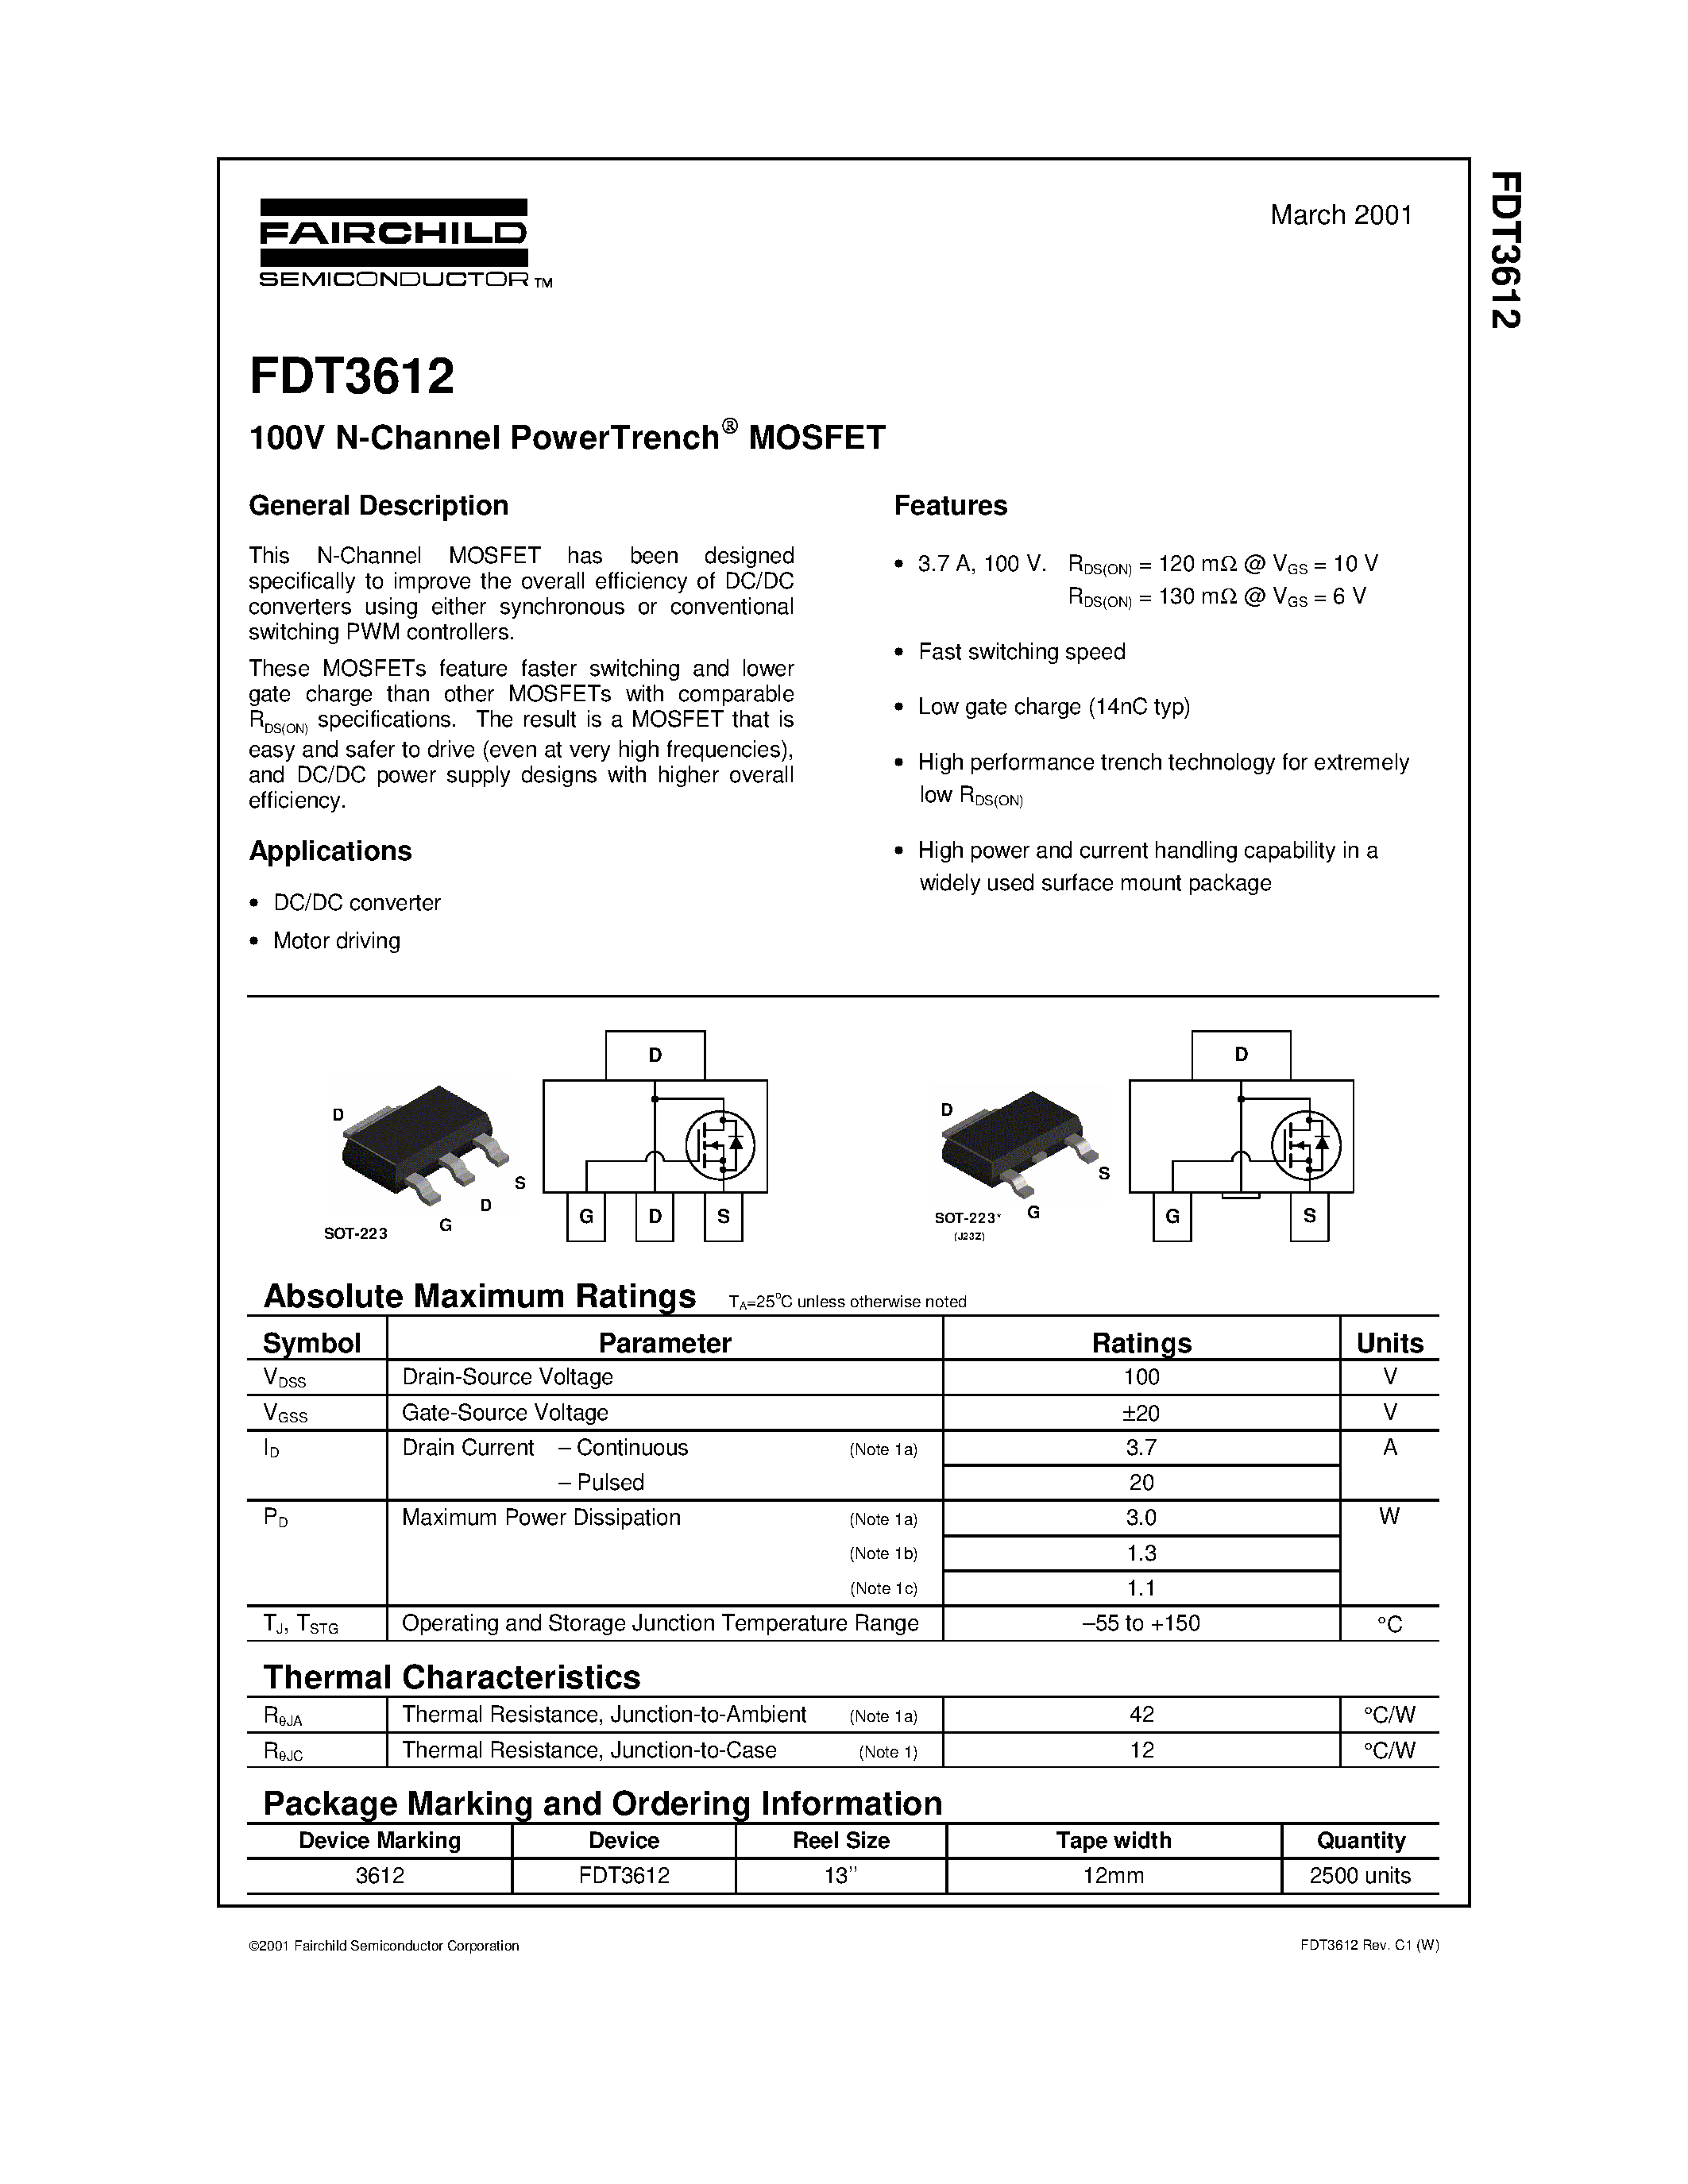 Даташит FDT3612 - 100V N-Channel PowerTrench MOSFET страница 1